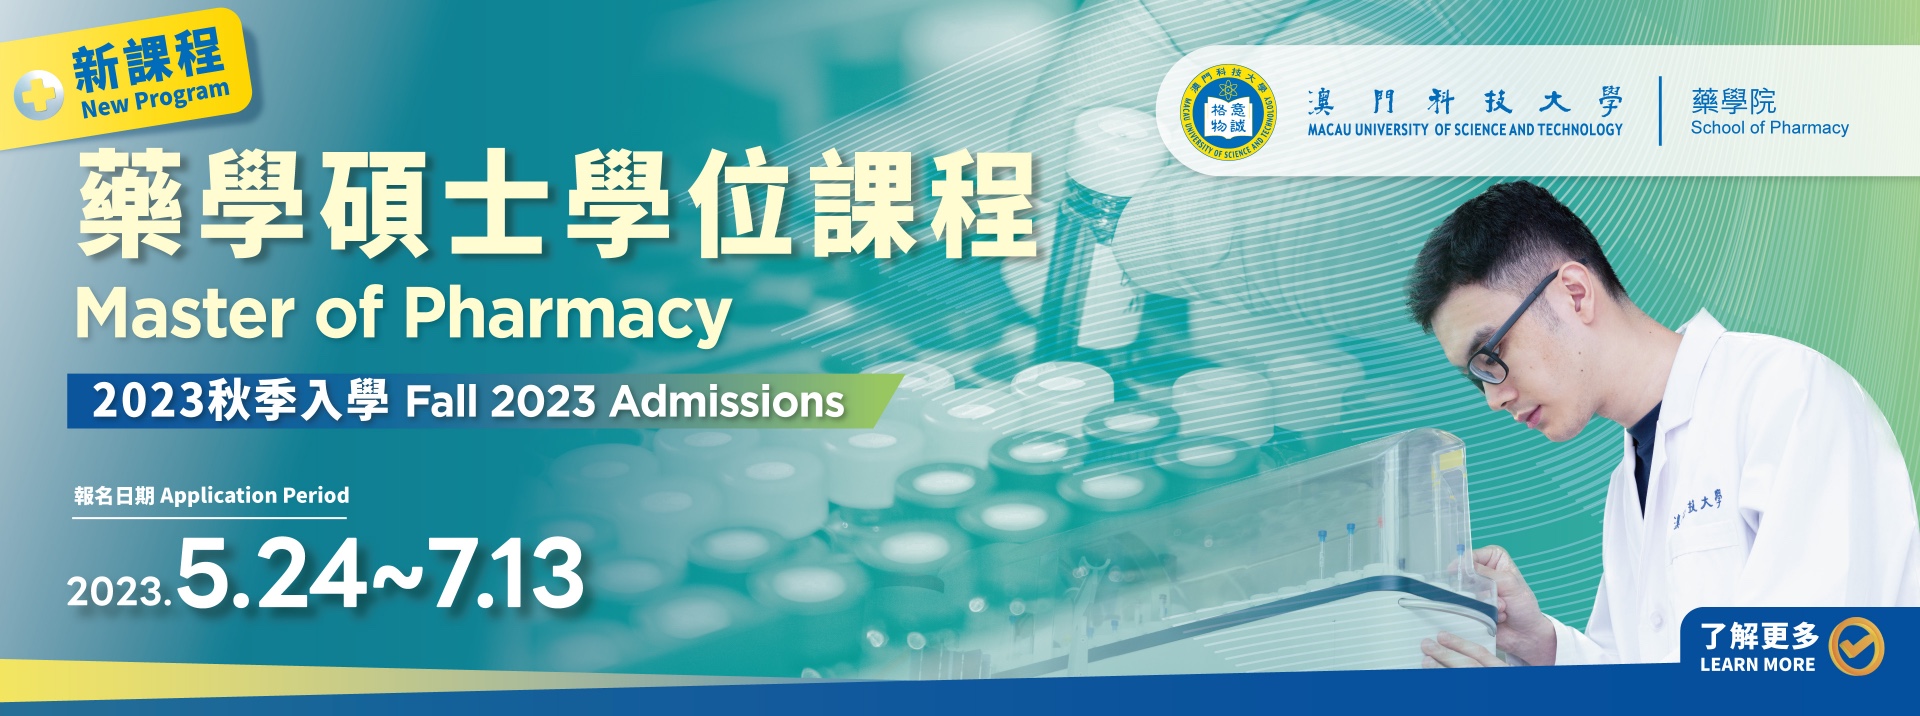 Applications for Master of Pharmacy for fall 2023 Admissions Are Open